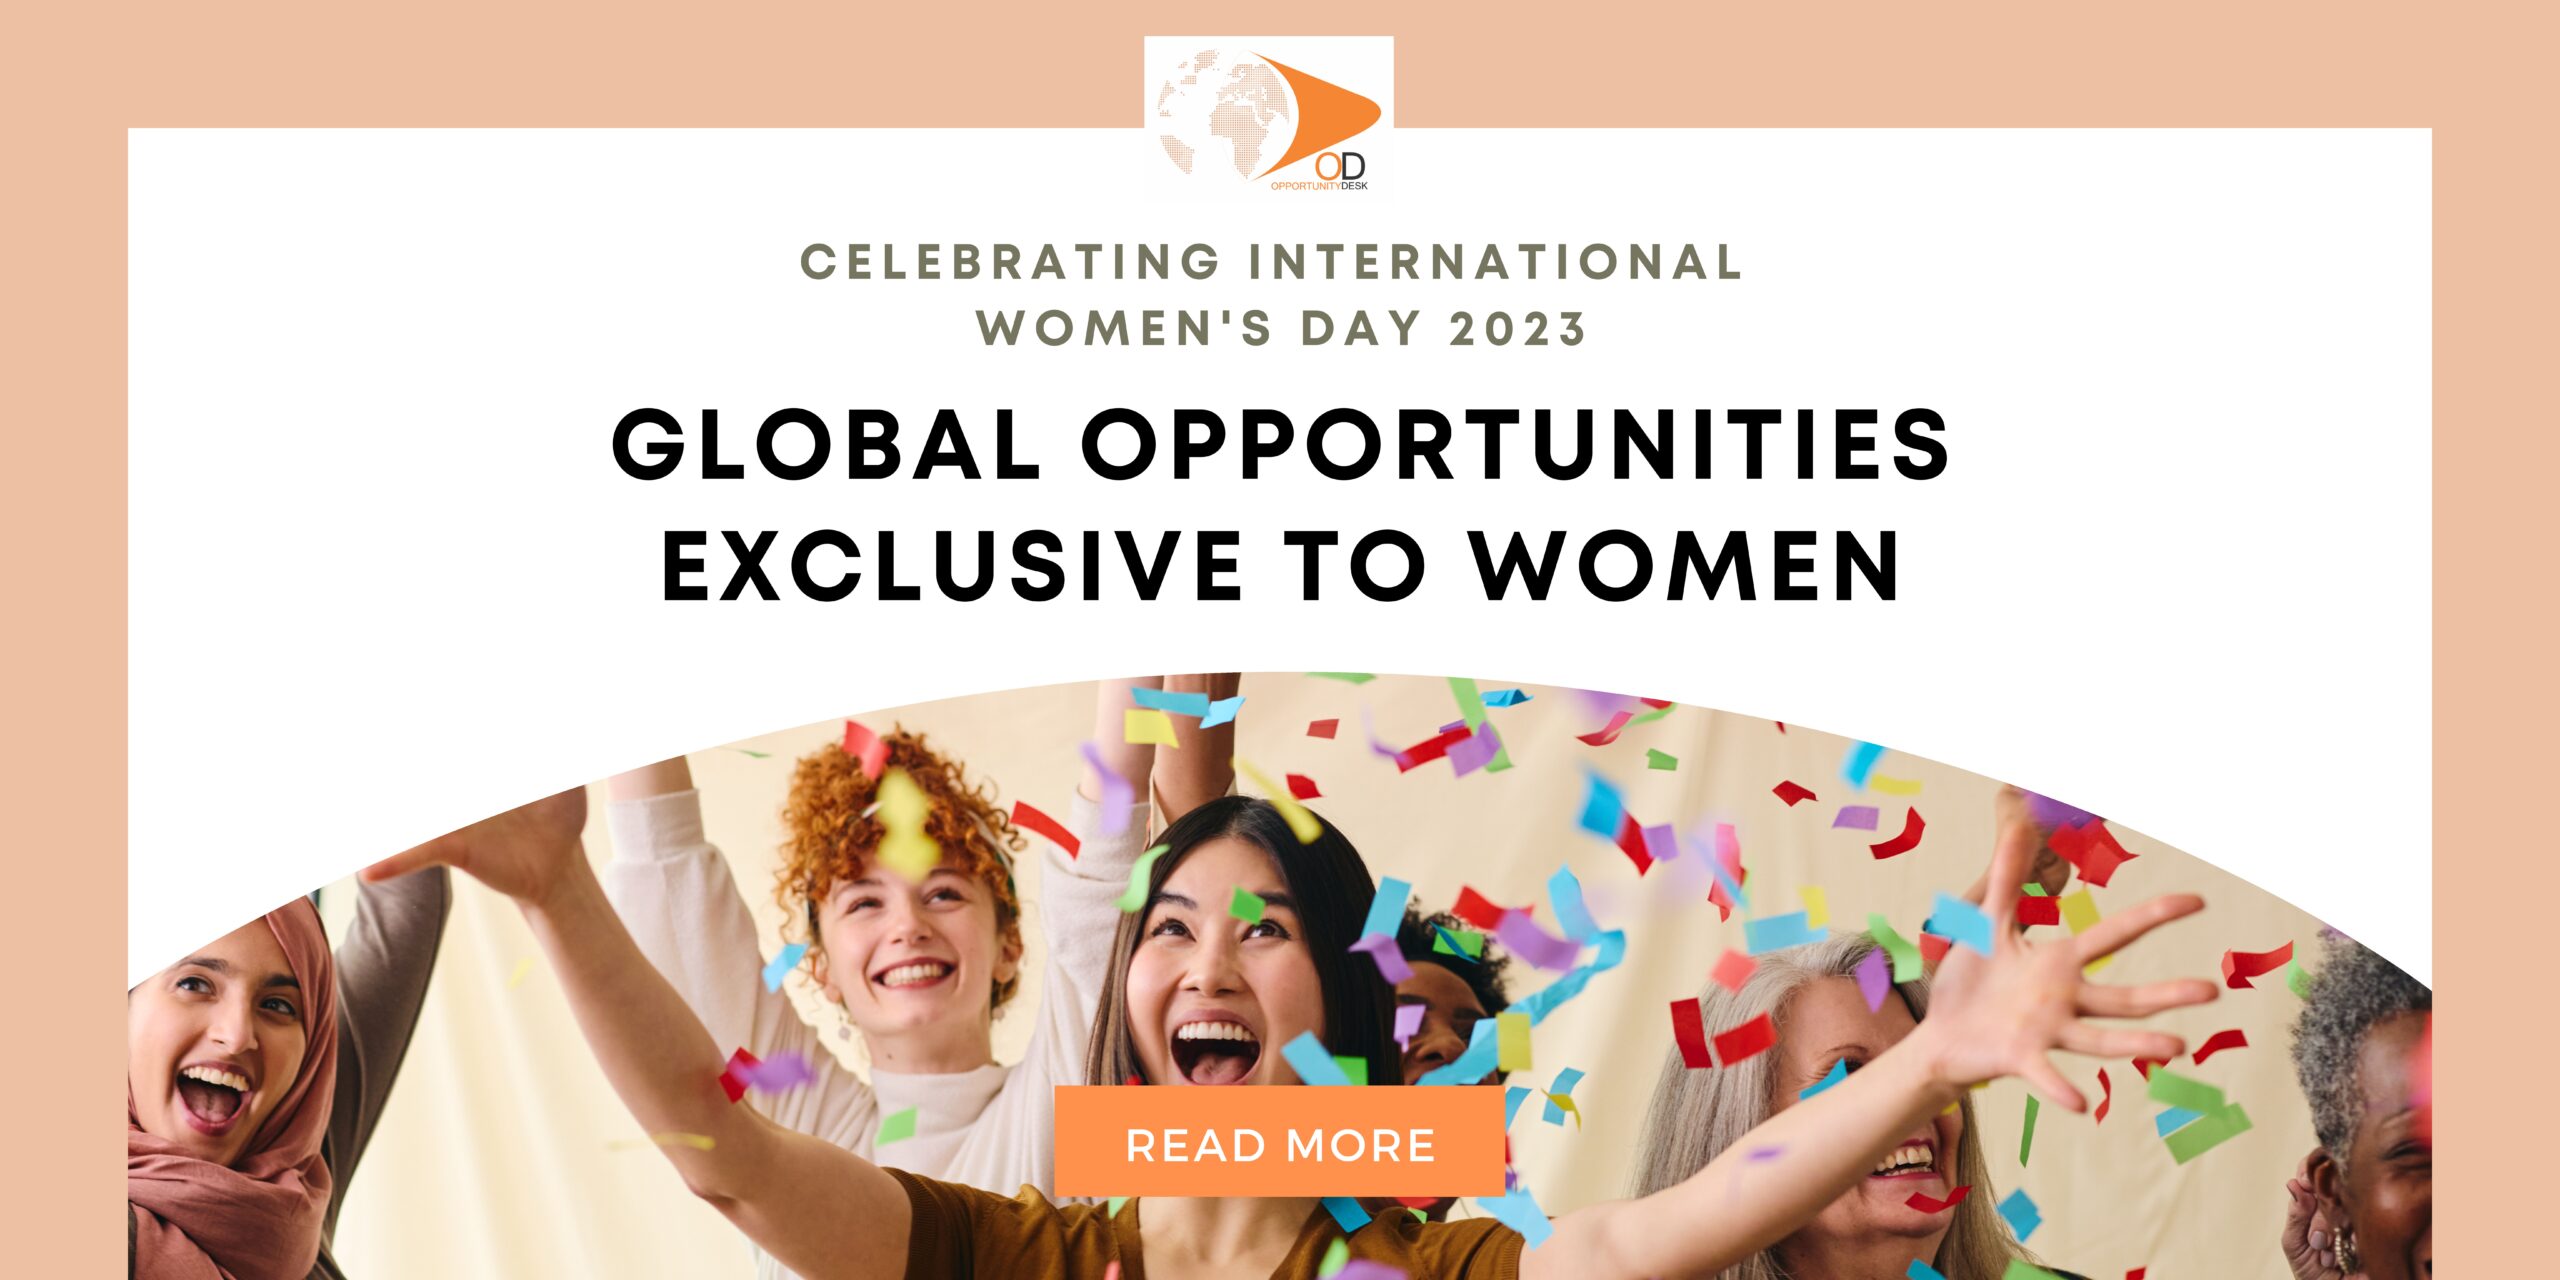 Celebrating International Women’s Day 2023: 20 Global Opportunities exclusive to Women